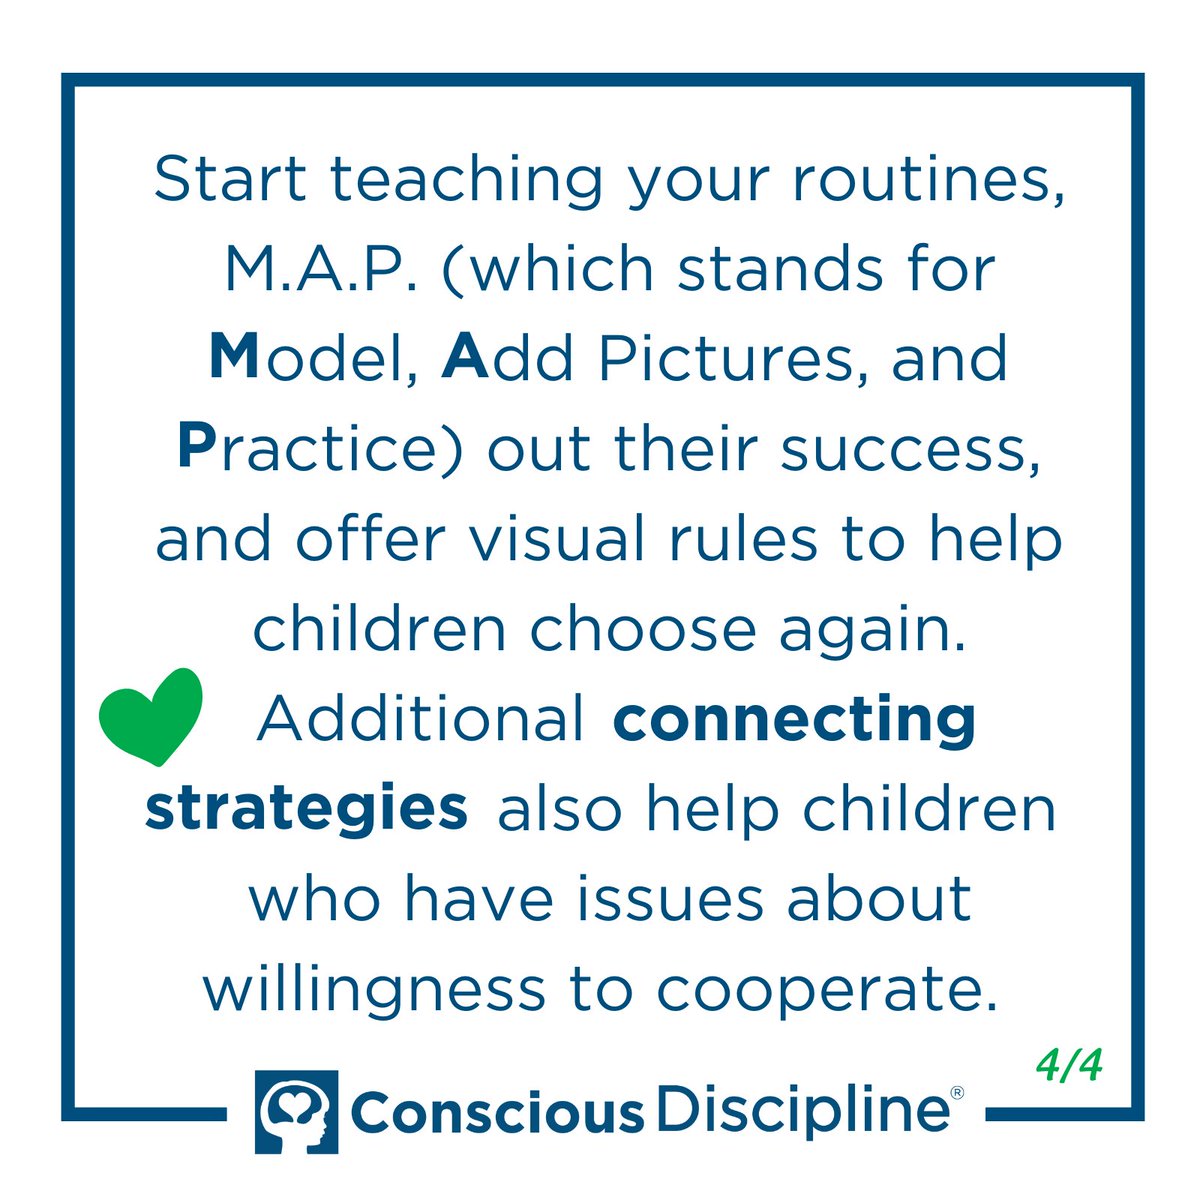 If you're interested learn more about how to M.A.P. out routines (which stands for Model, Add Pictures, and Practice), check out this free webinar by Certified Instructor Kim Jackson to learn more: consciousdiscipline.com/e-learning/web…